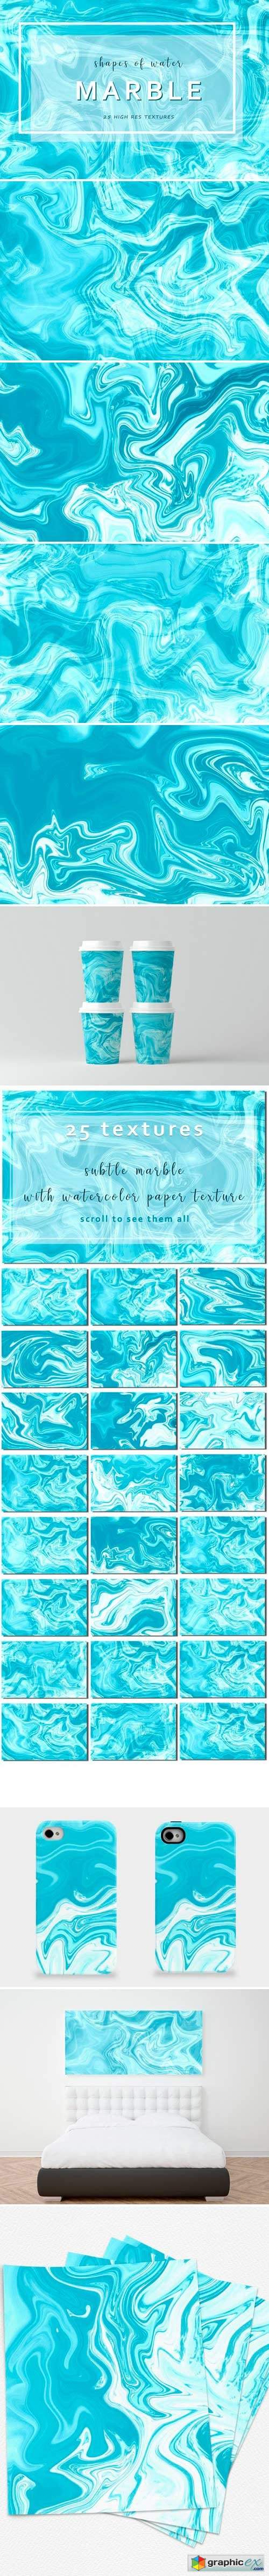 25 Marble Textures "Shapes of Water"